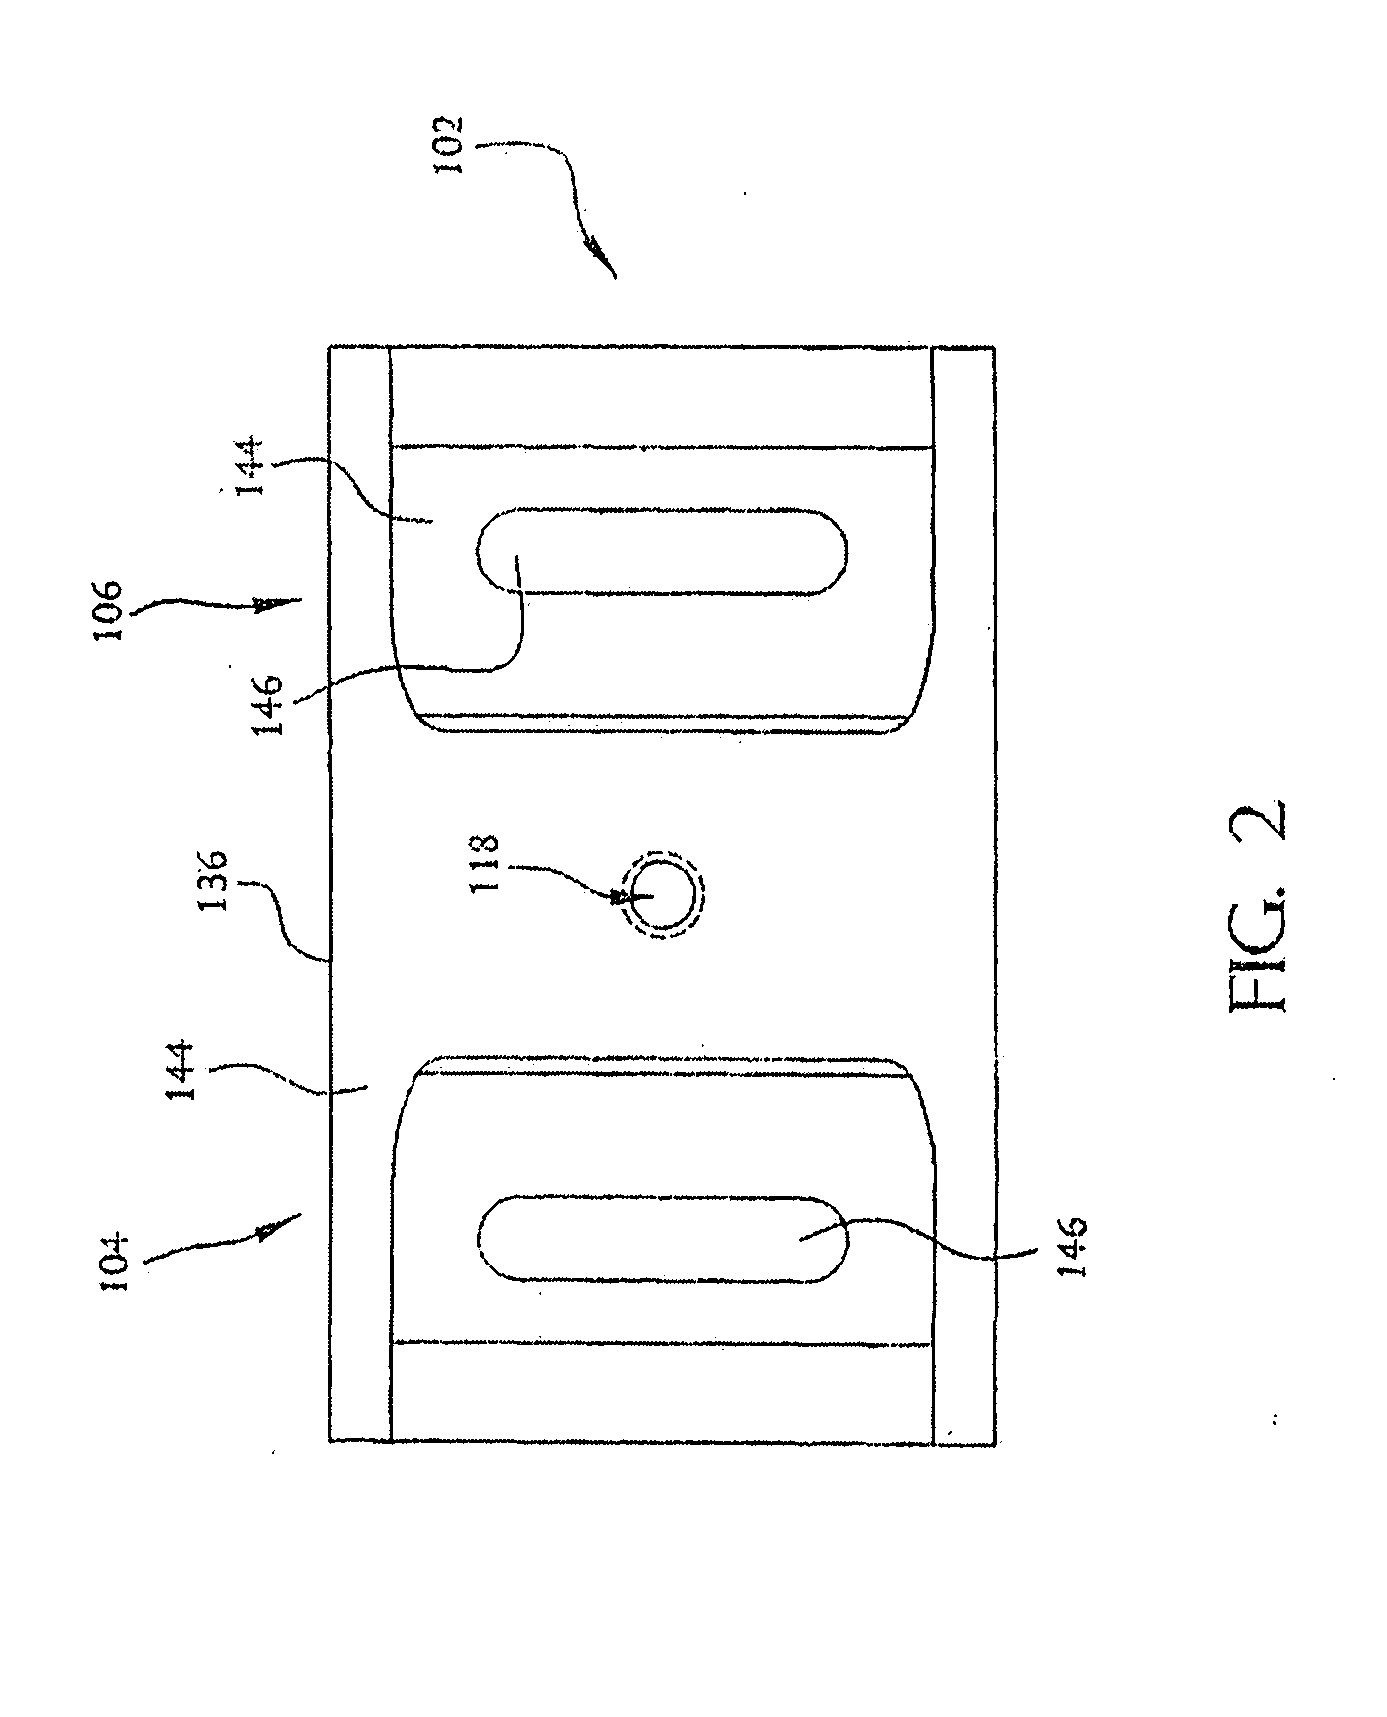 Ultra-Fast Nucleic Acid Sequencing Device and a Method for Making and Using the Same